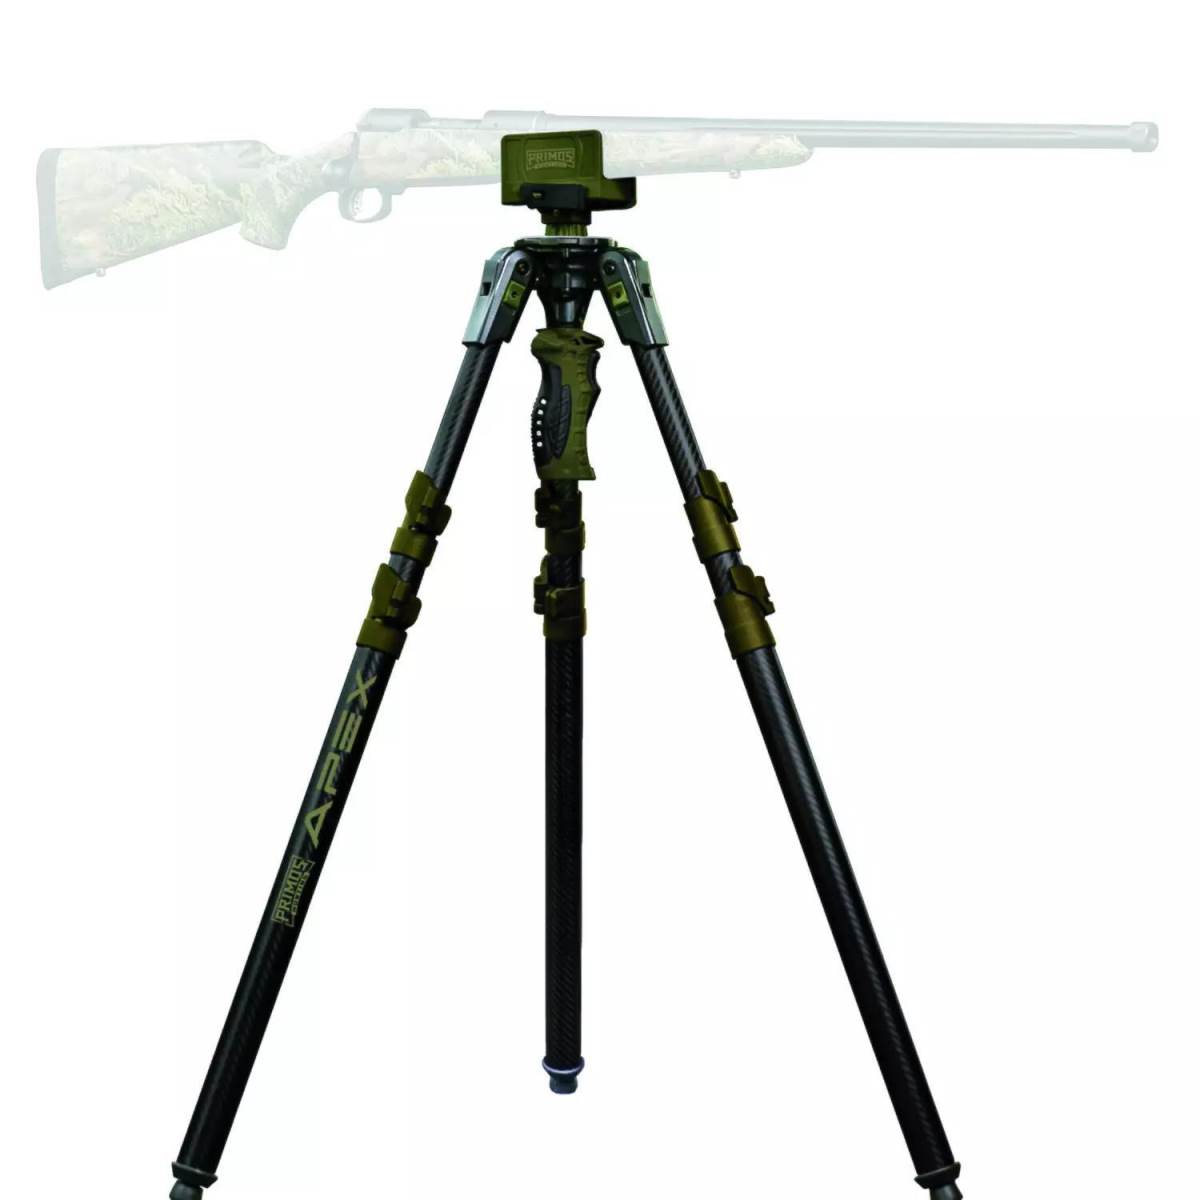 Proven Picks For Building The Best Shooting Rest - Petersen's Hunting